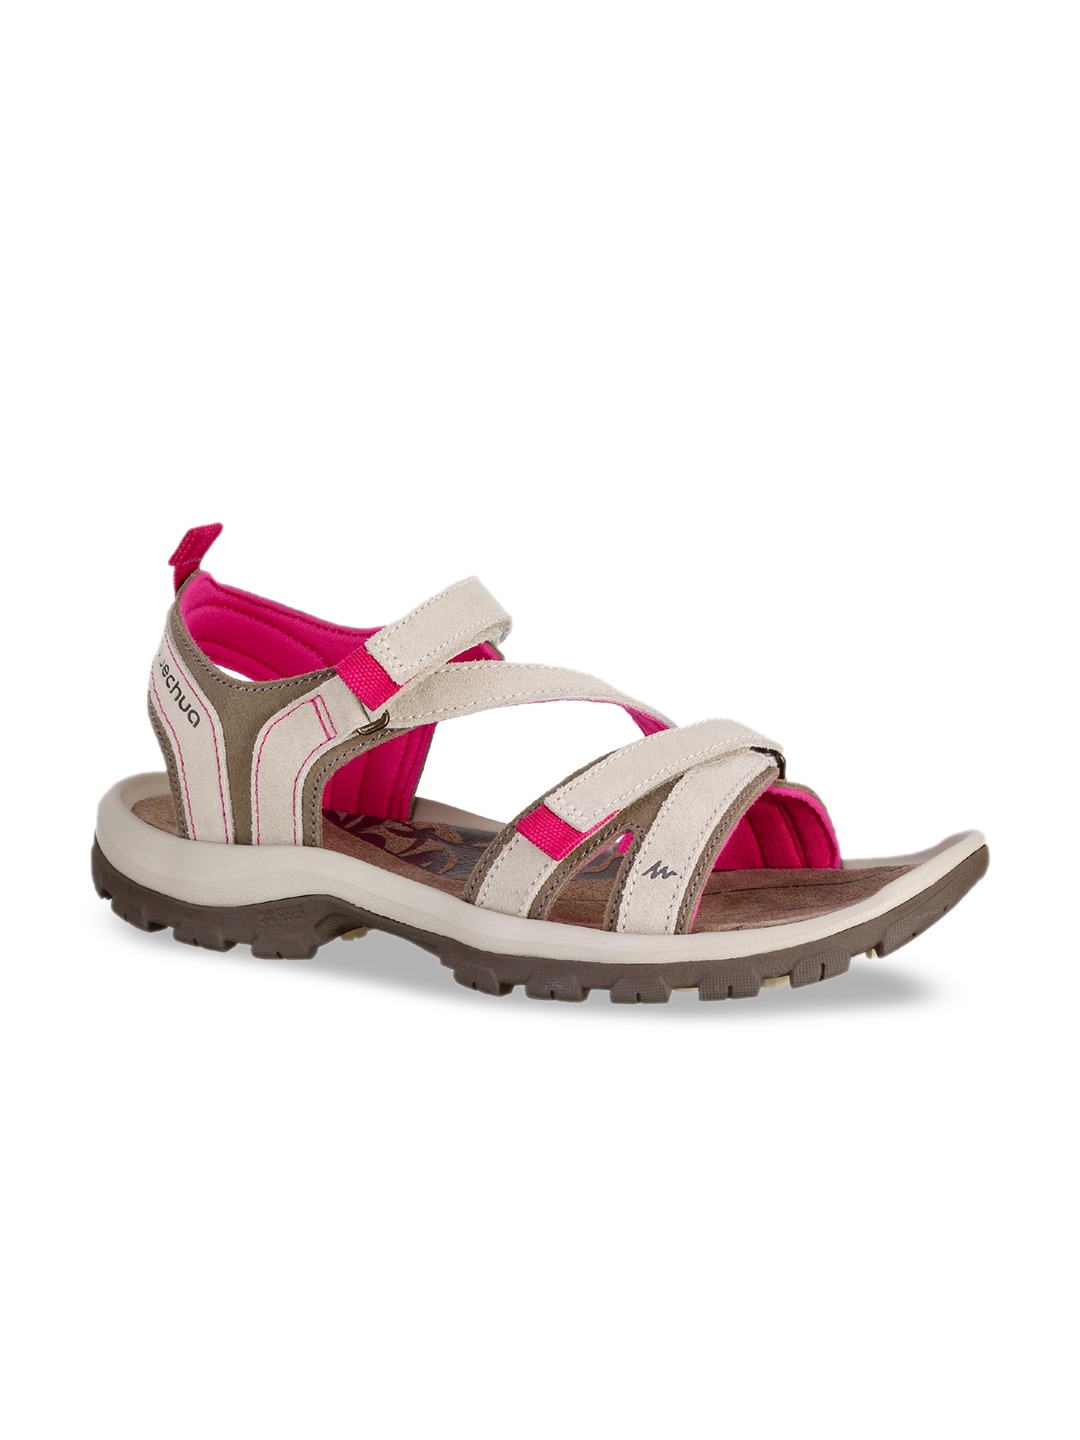 Quechua By Decathlon Unisex Beige & Pink Leather Sports Sandal Price in India